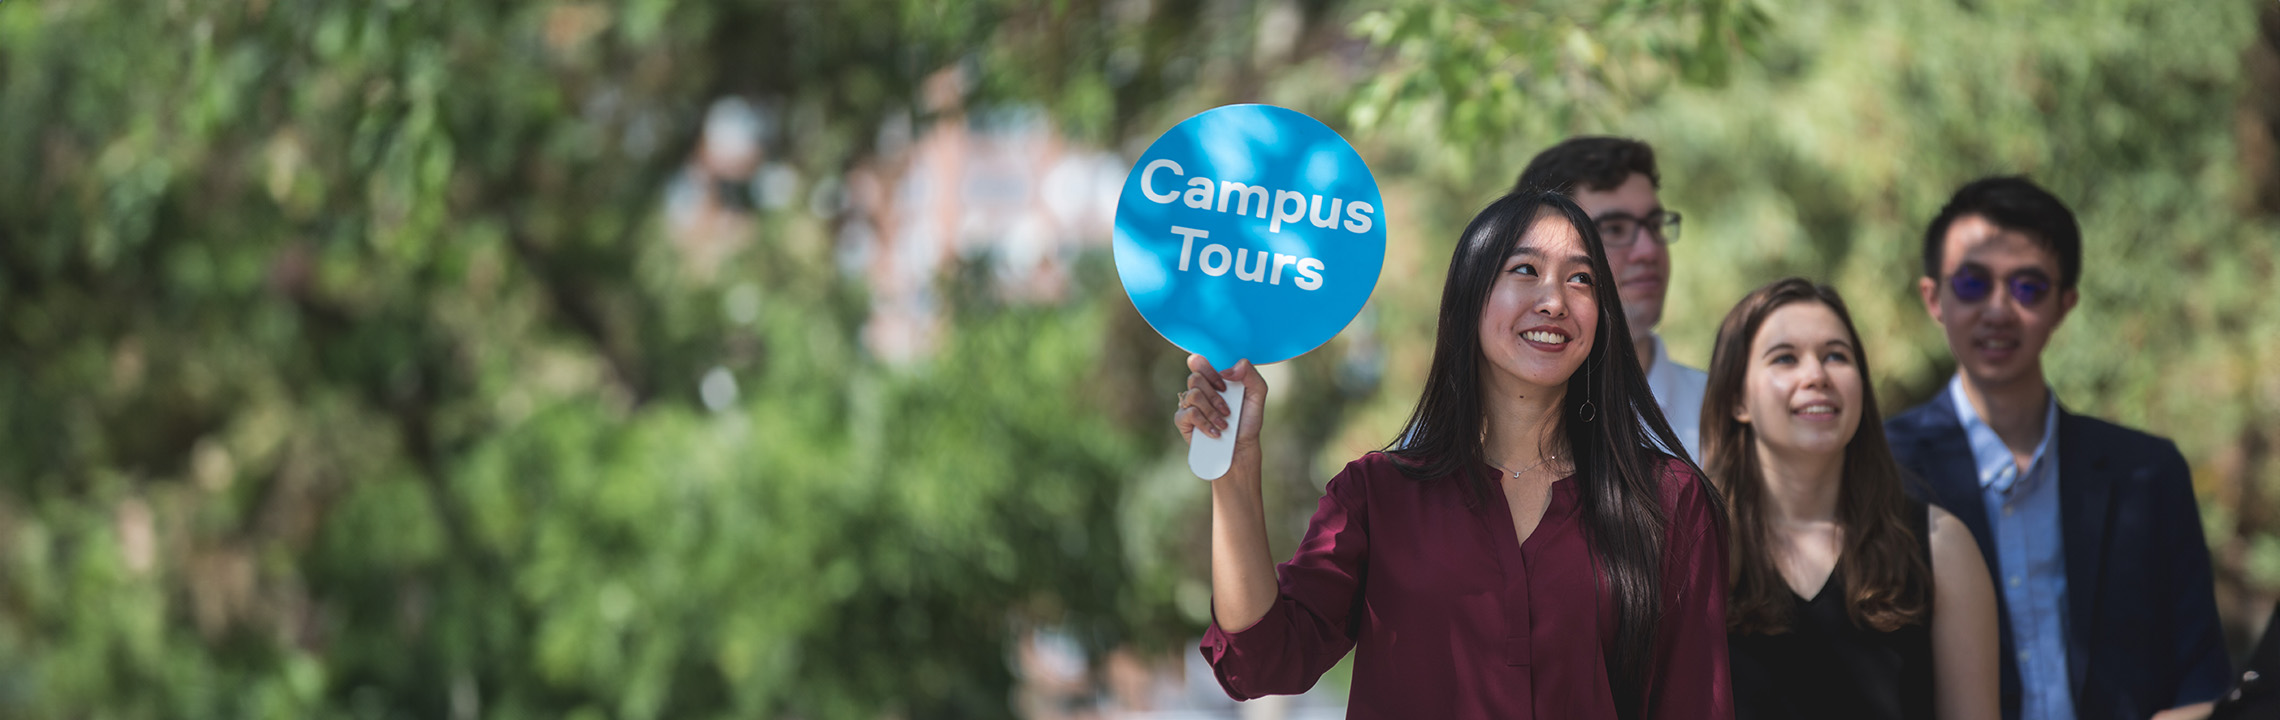 Guests following the campus tour guide with a sign in their hand.